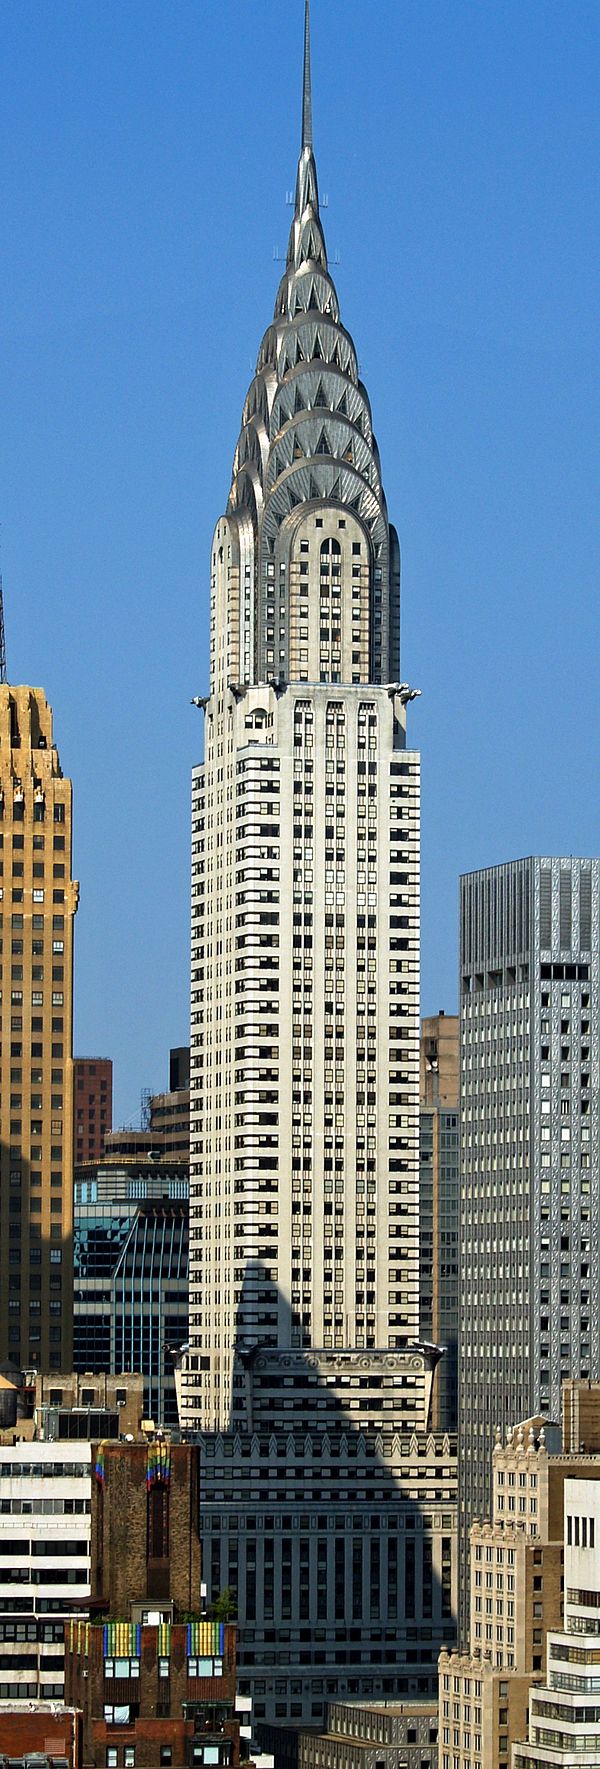 The Chrysler Building was the first skyscraper with a spire in the world.